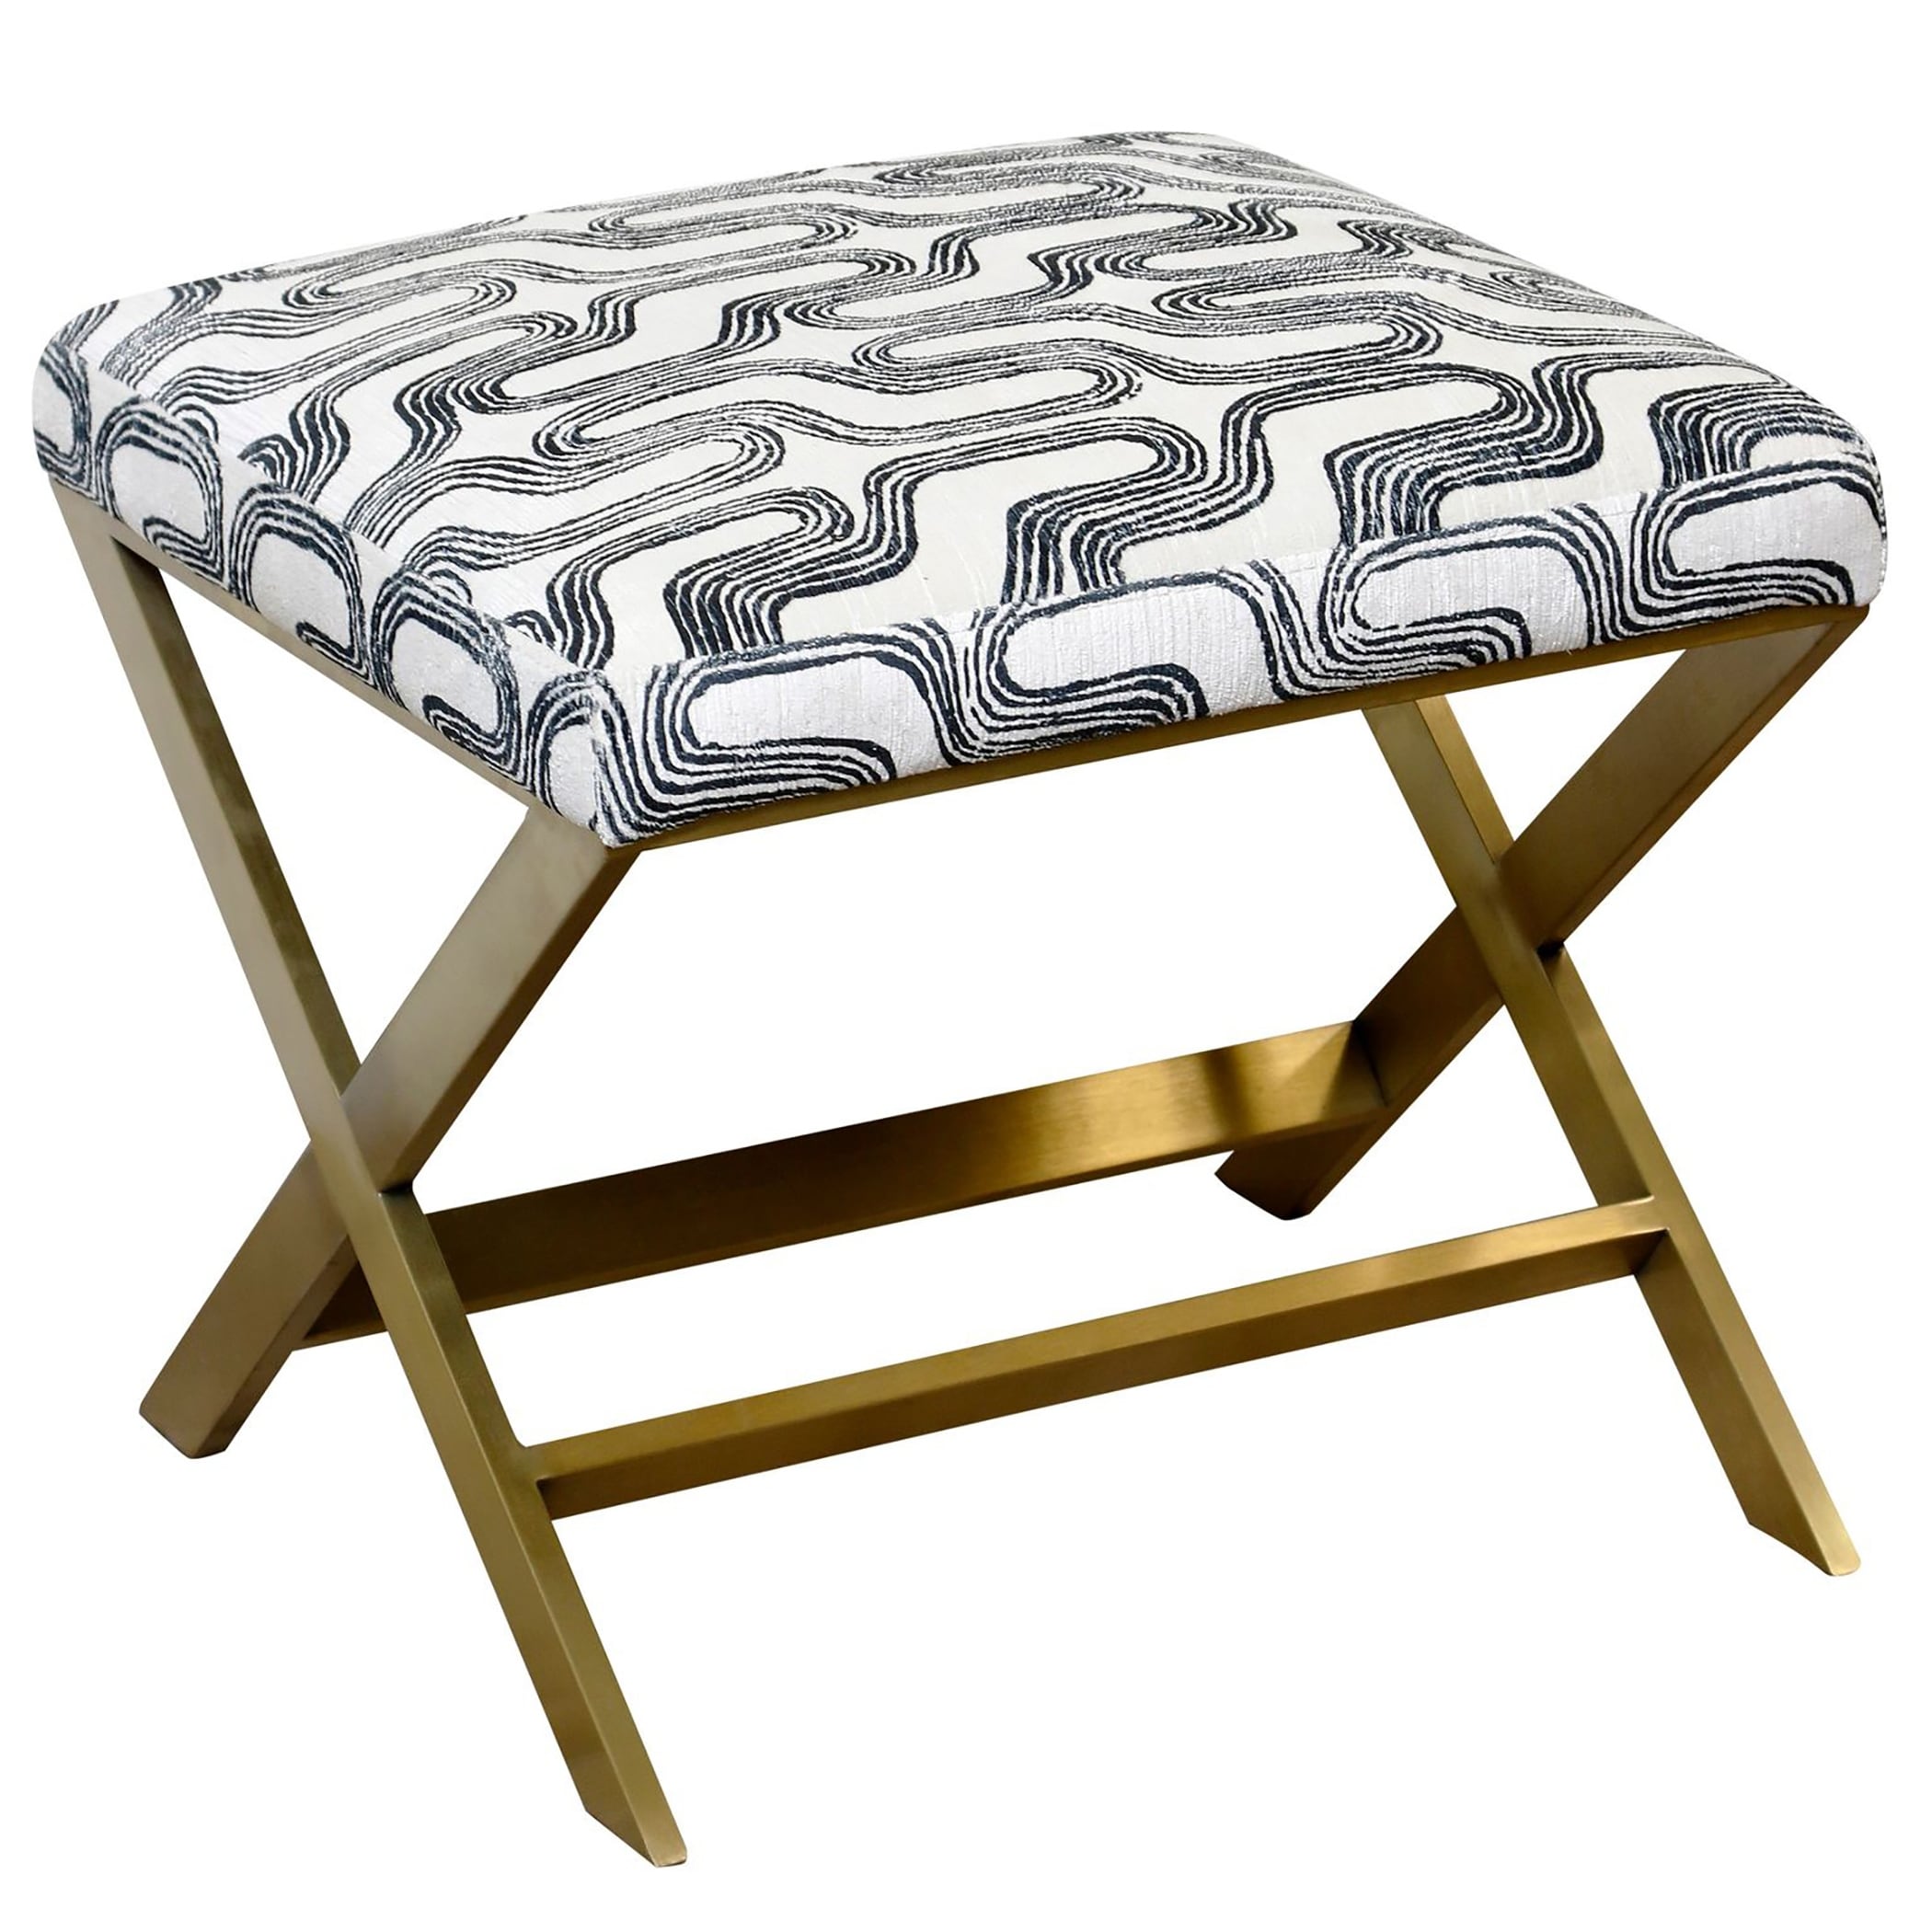 Harp and Finial - Ellis Ottoman - Navarro Fabric With Brushed Gold Legs